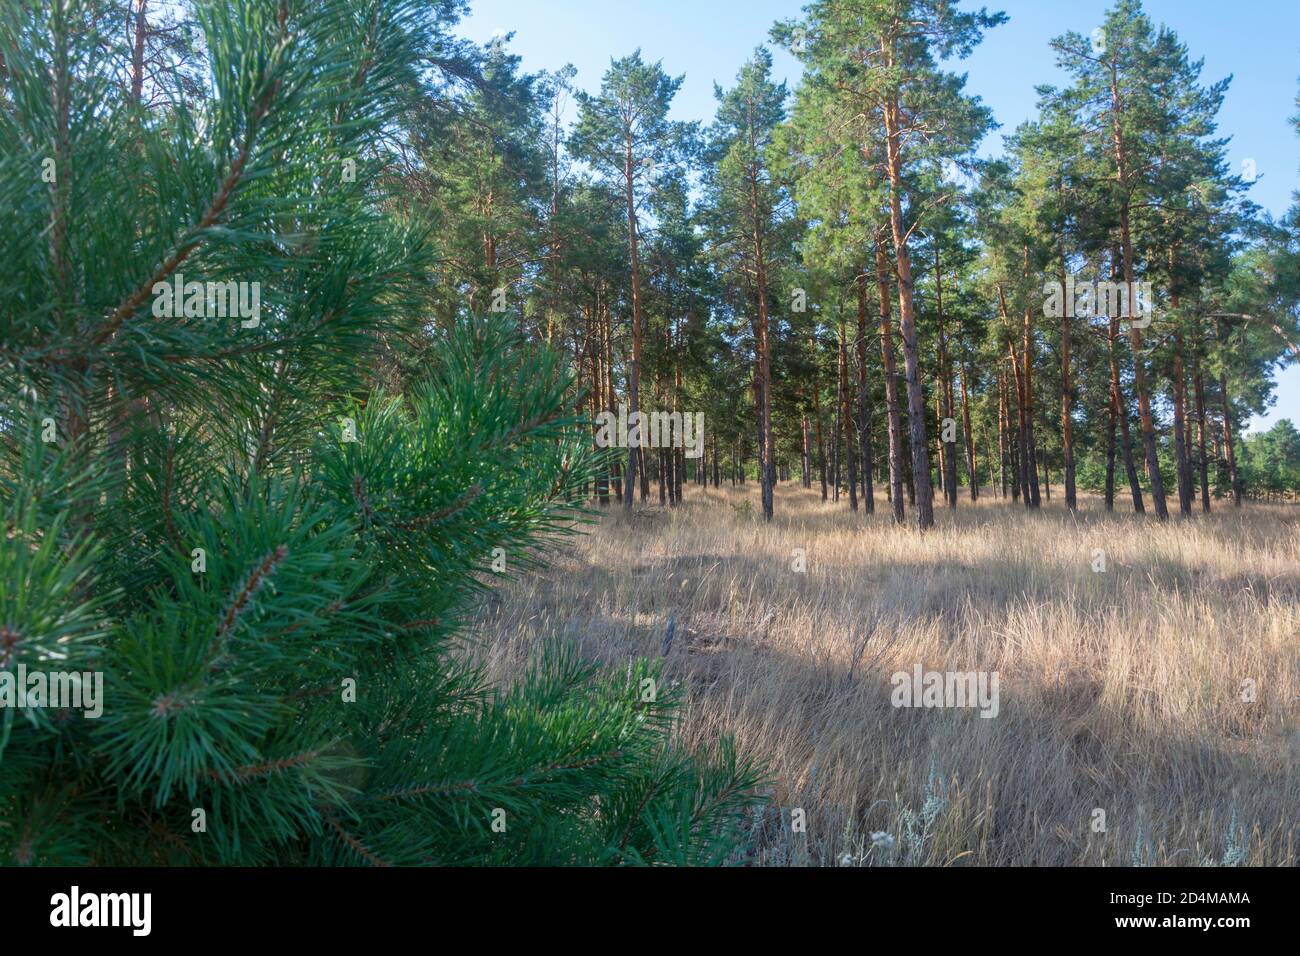 Pine forest with tall conifers and young pine in the foreground without focus. Glade with sunlight in the autumn forest. Blurred background Stock Photo